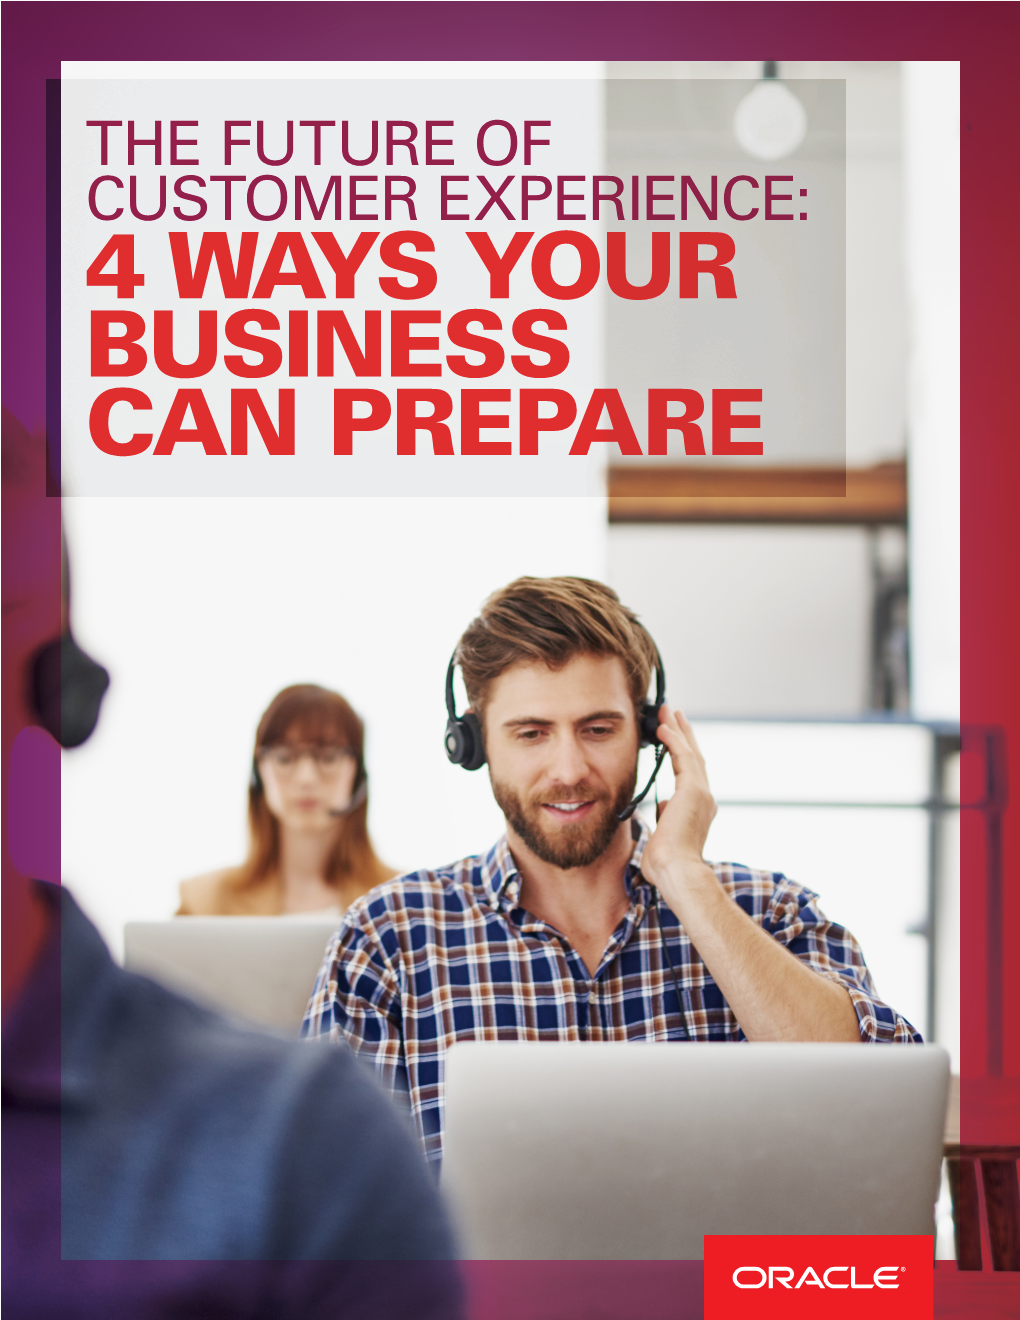 4 Ways Your Business Can Prepare